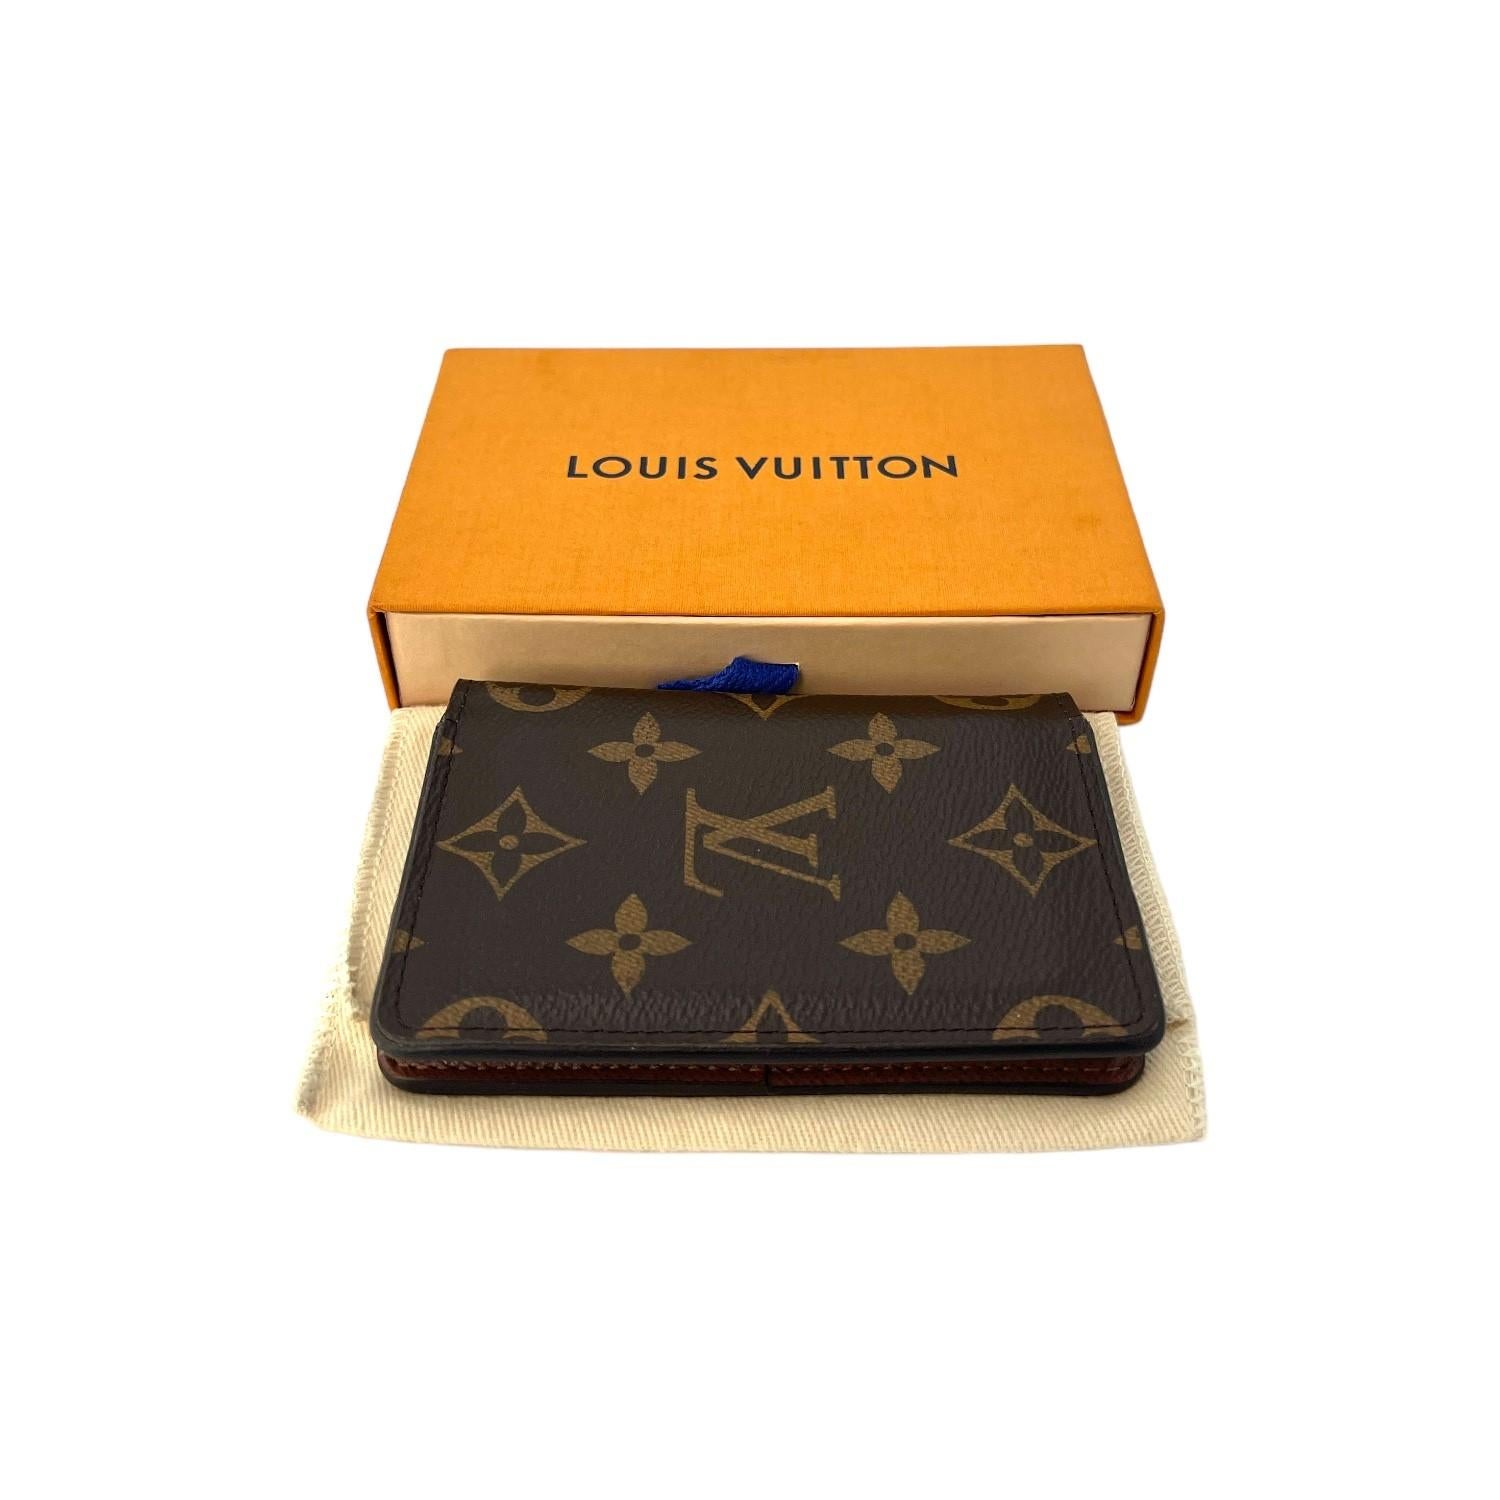 This Louis Vuitton Pocket Organizer was made in France and it is finely crafted of the classic Louis Vuitton Monogram coated canvas and leather exterior. There is a slip pocket on the backside. It has a fold closure that opens up to a leather